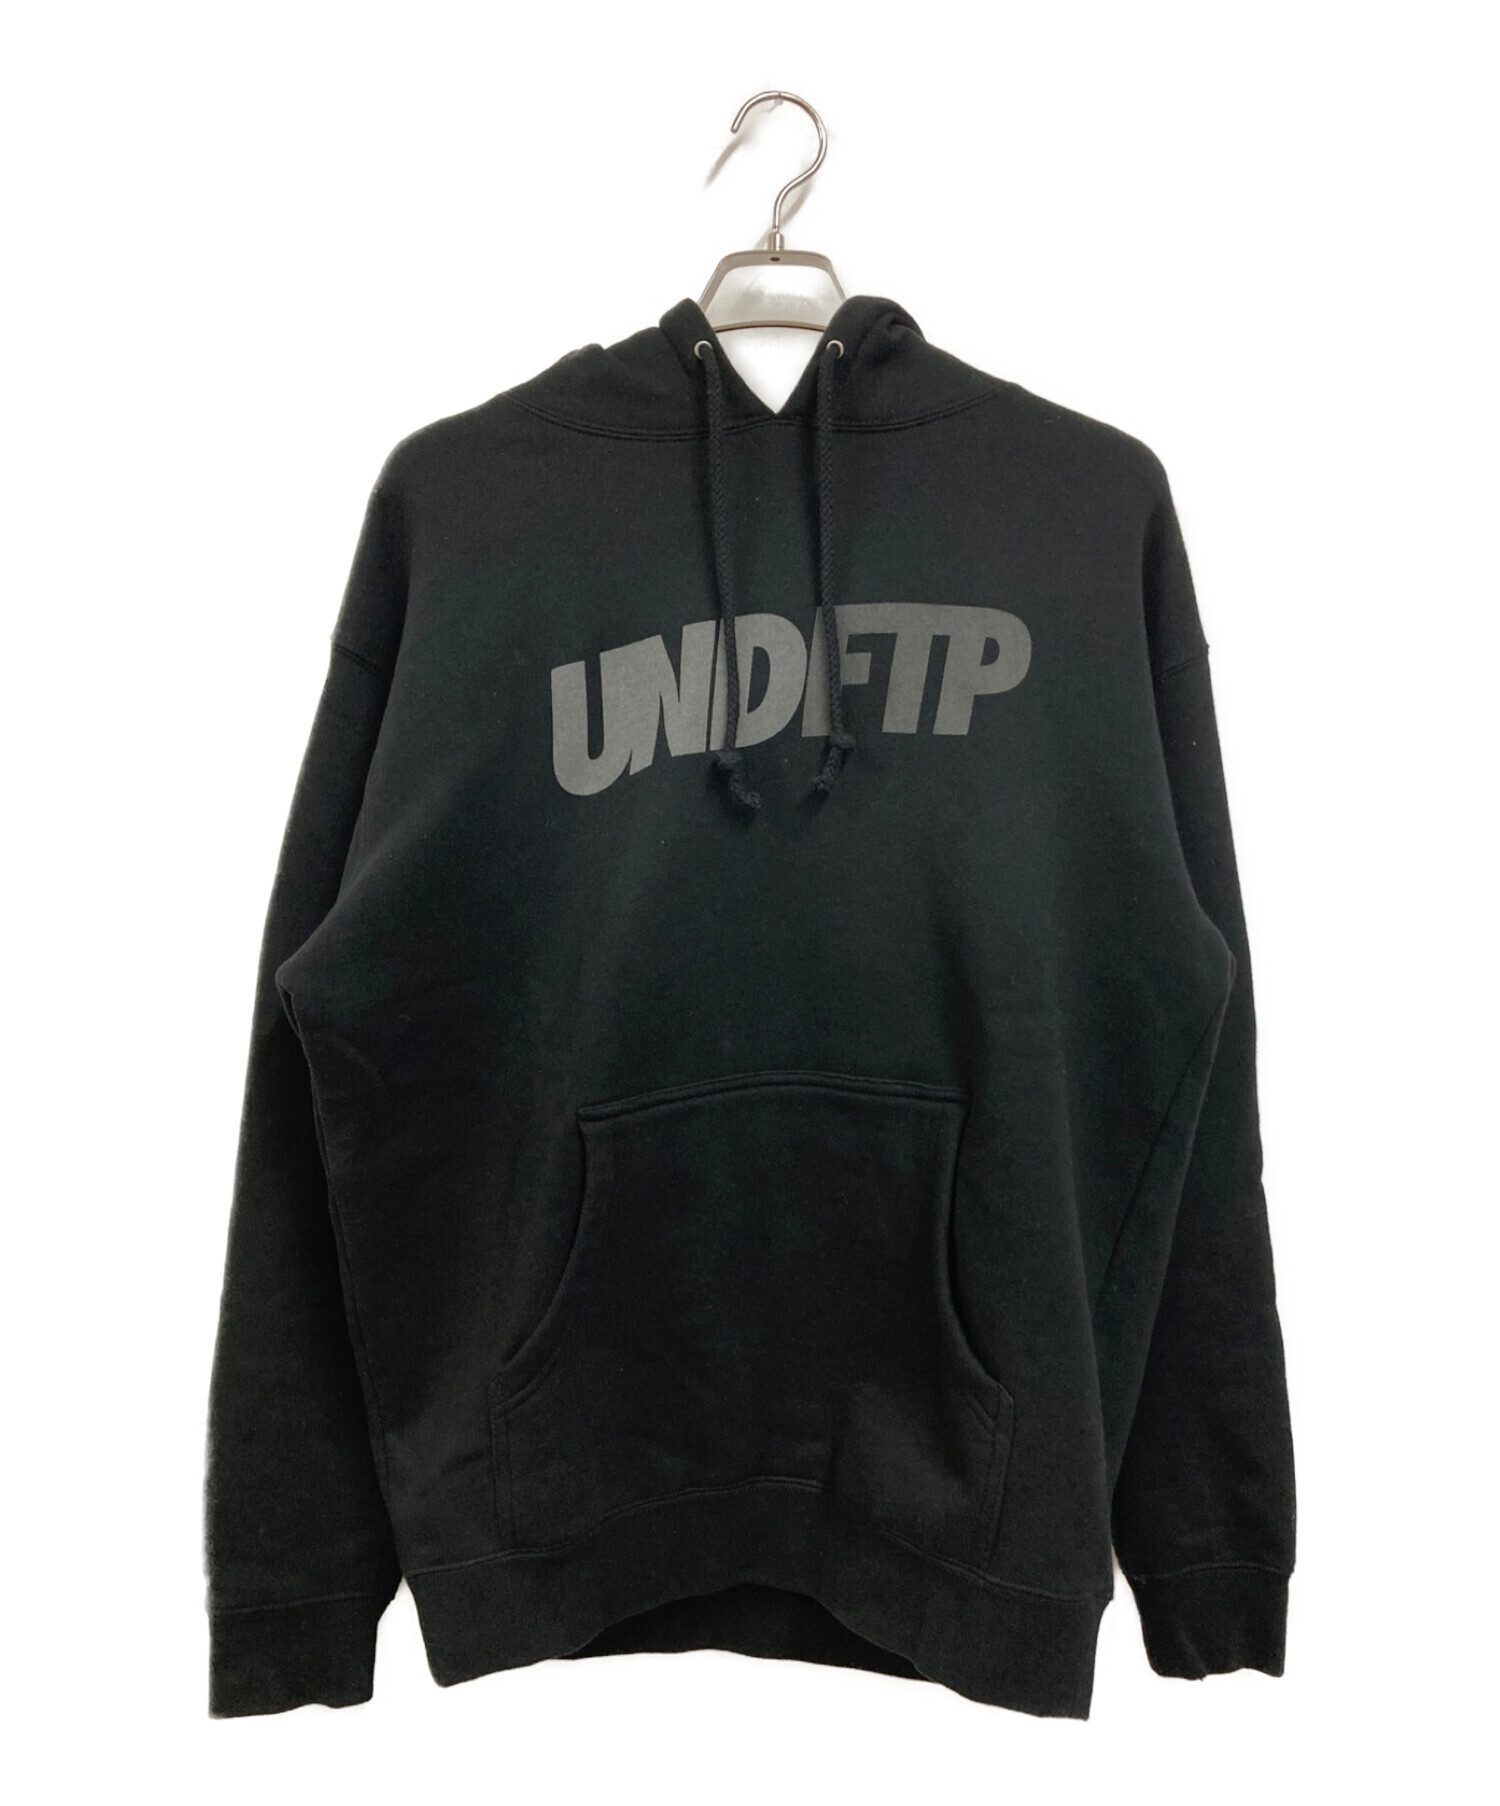 FTP undefeated パーカー